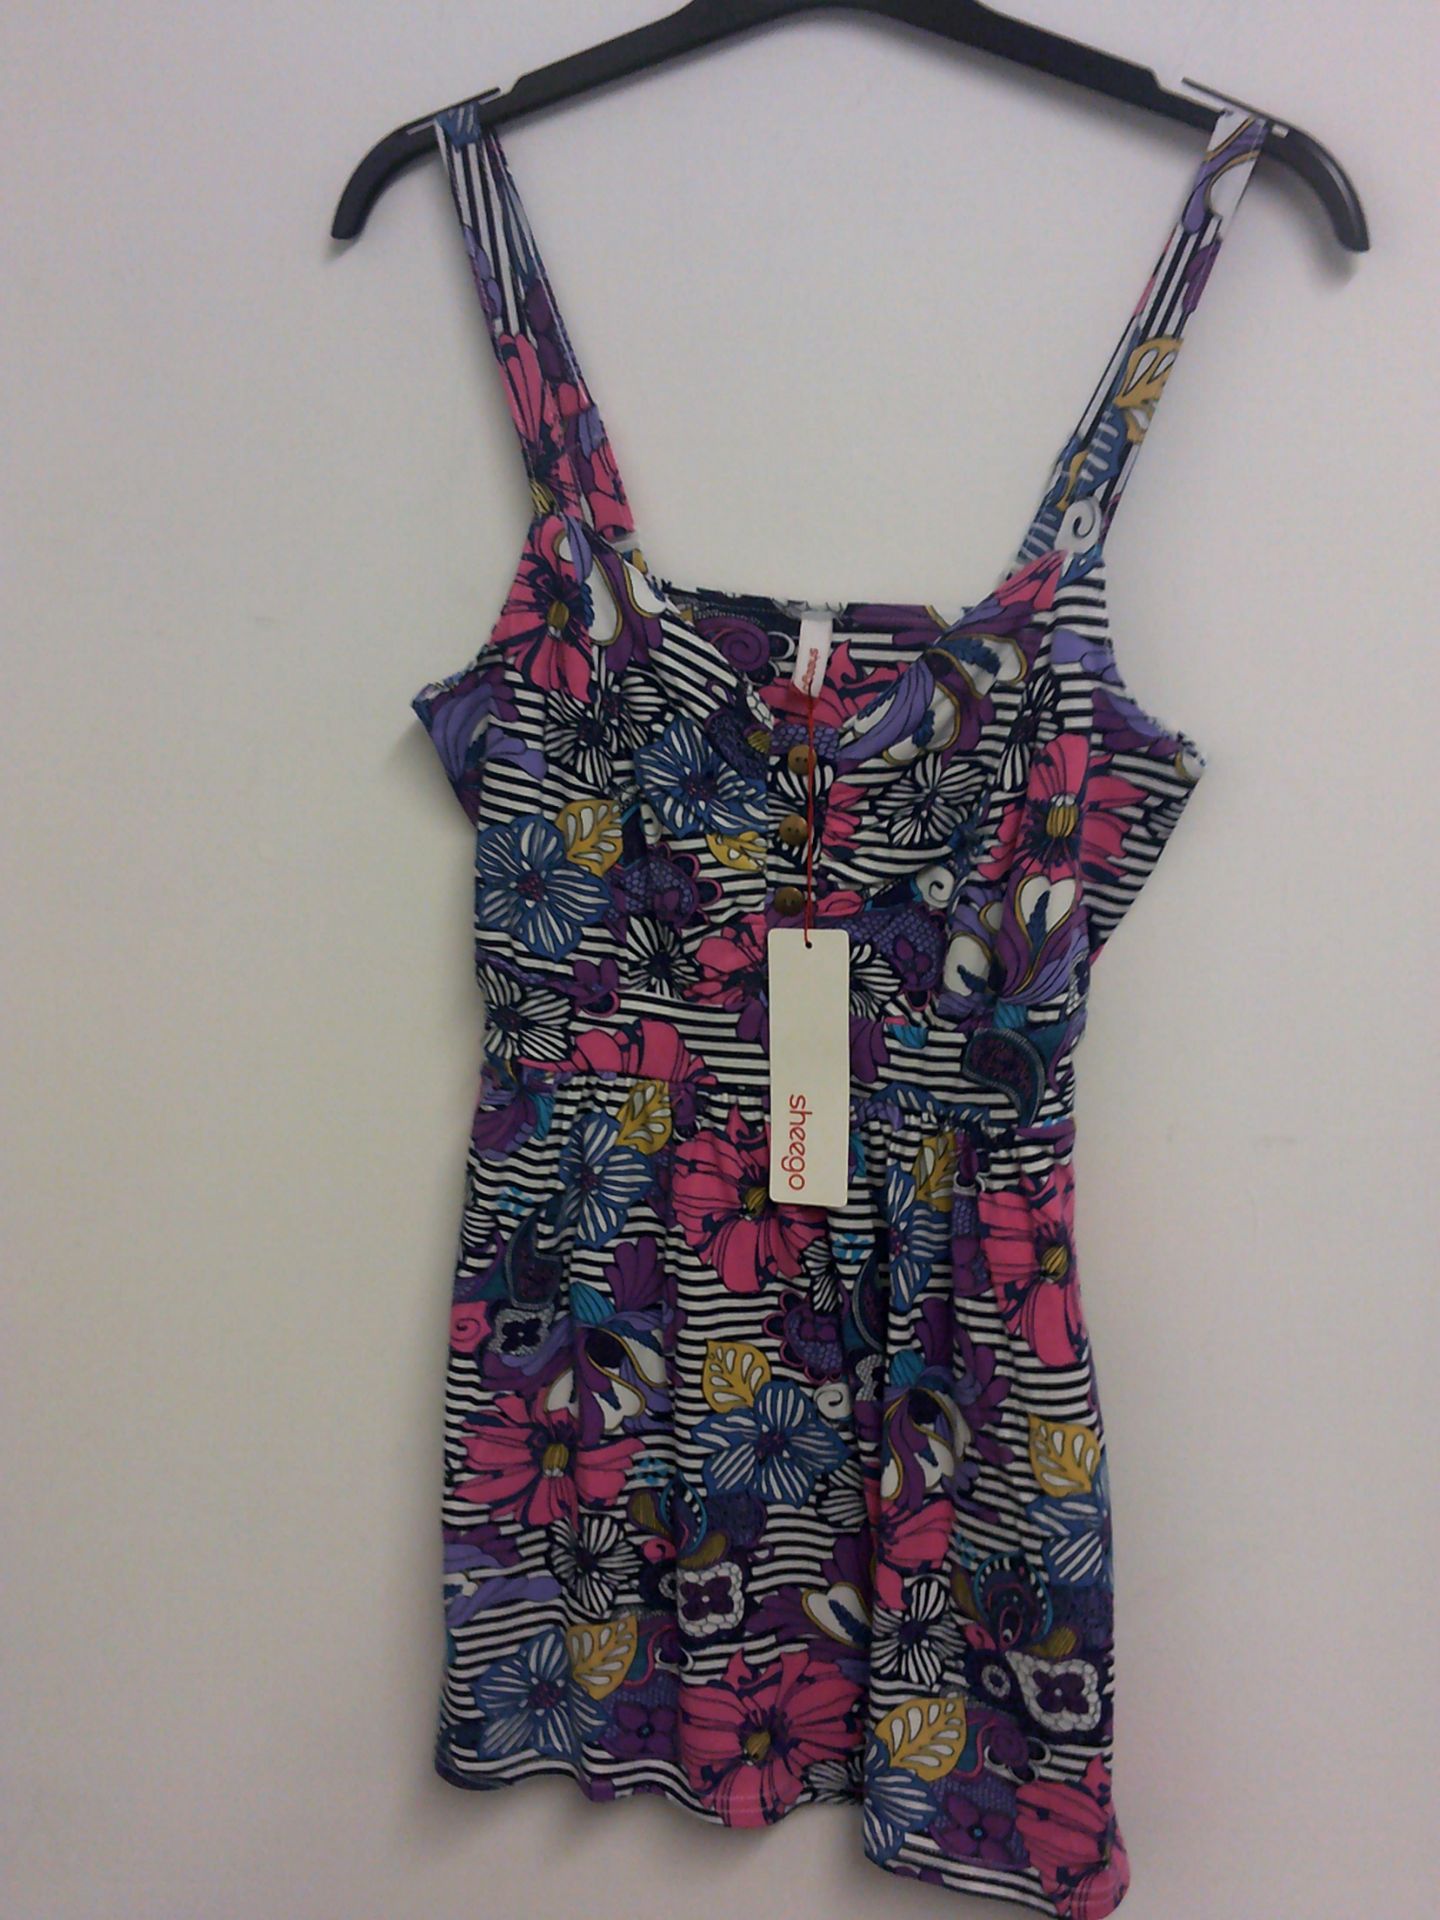 SHEEGO LADIES SUMMER TOP SIZE 16